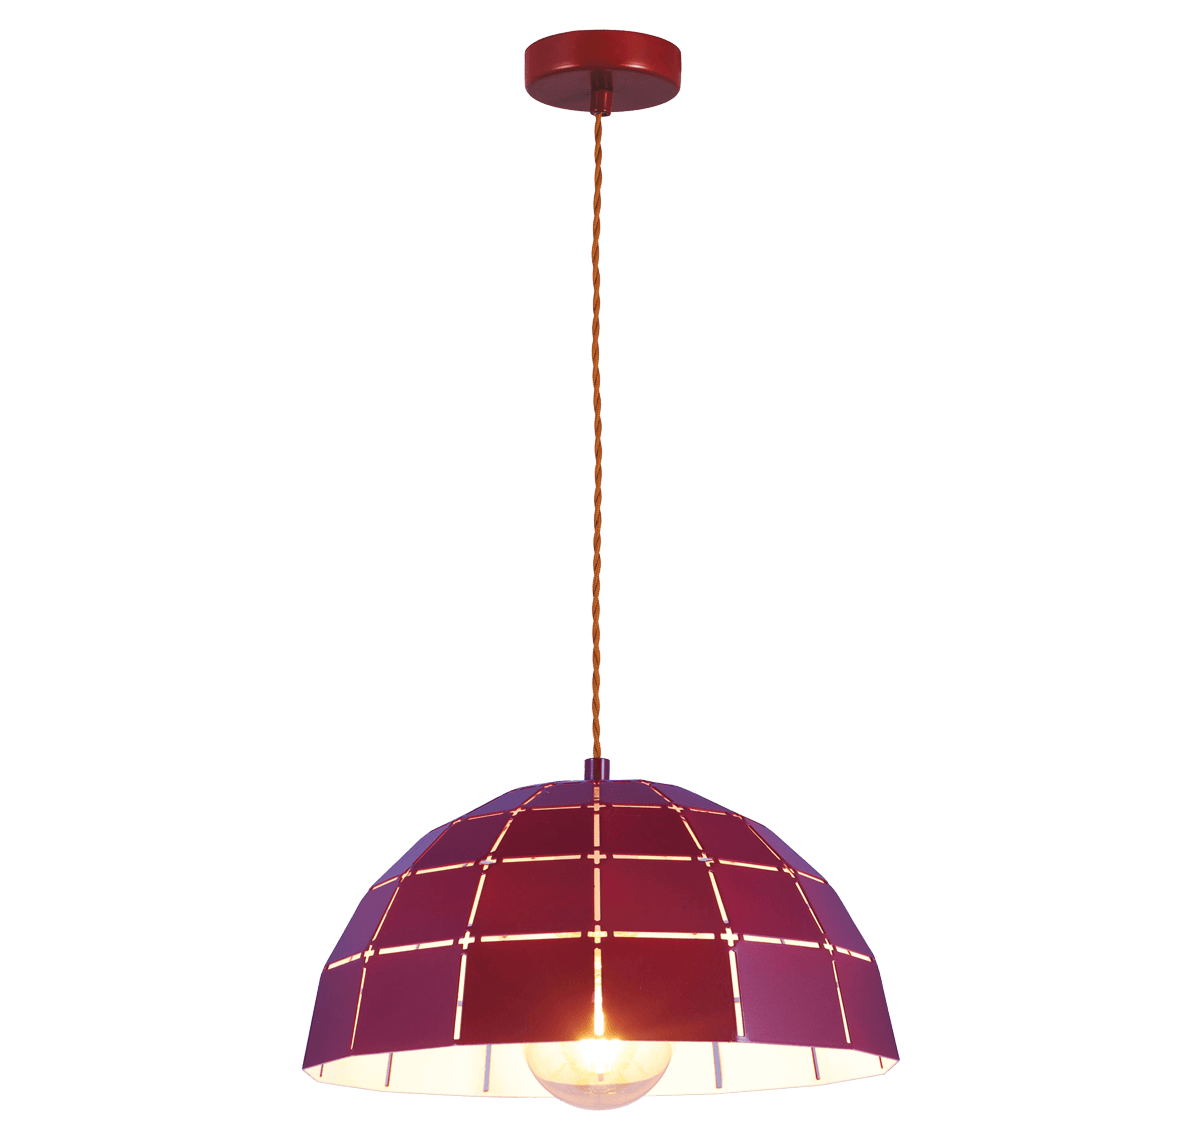 Havells Penelope Pendant 1LS E27 D300 RED Ceiling mounted Pendant